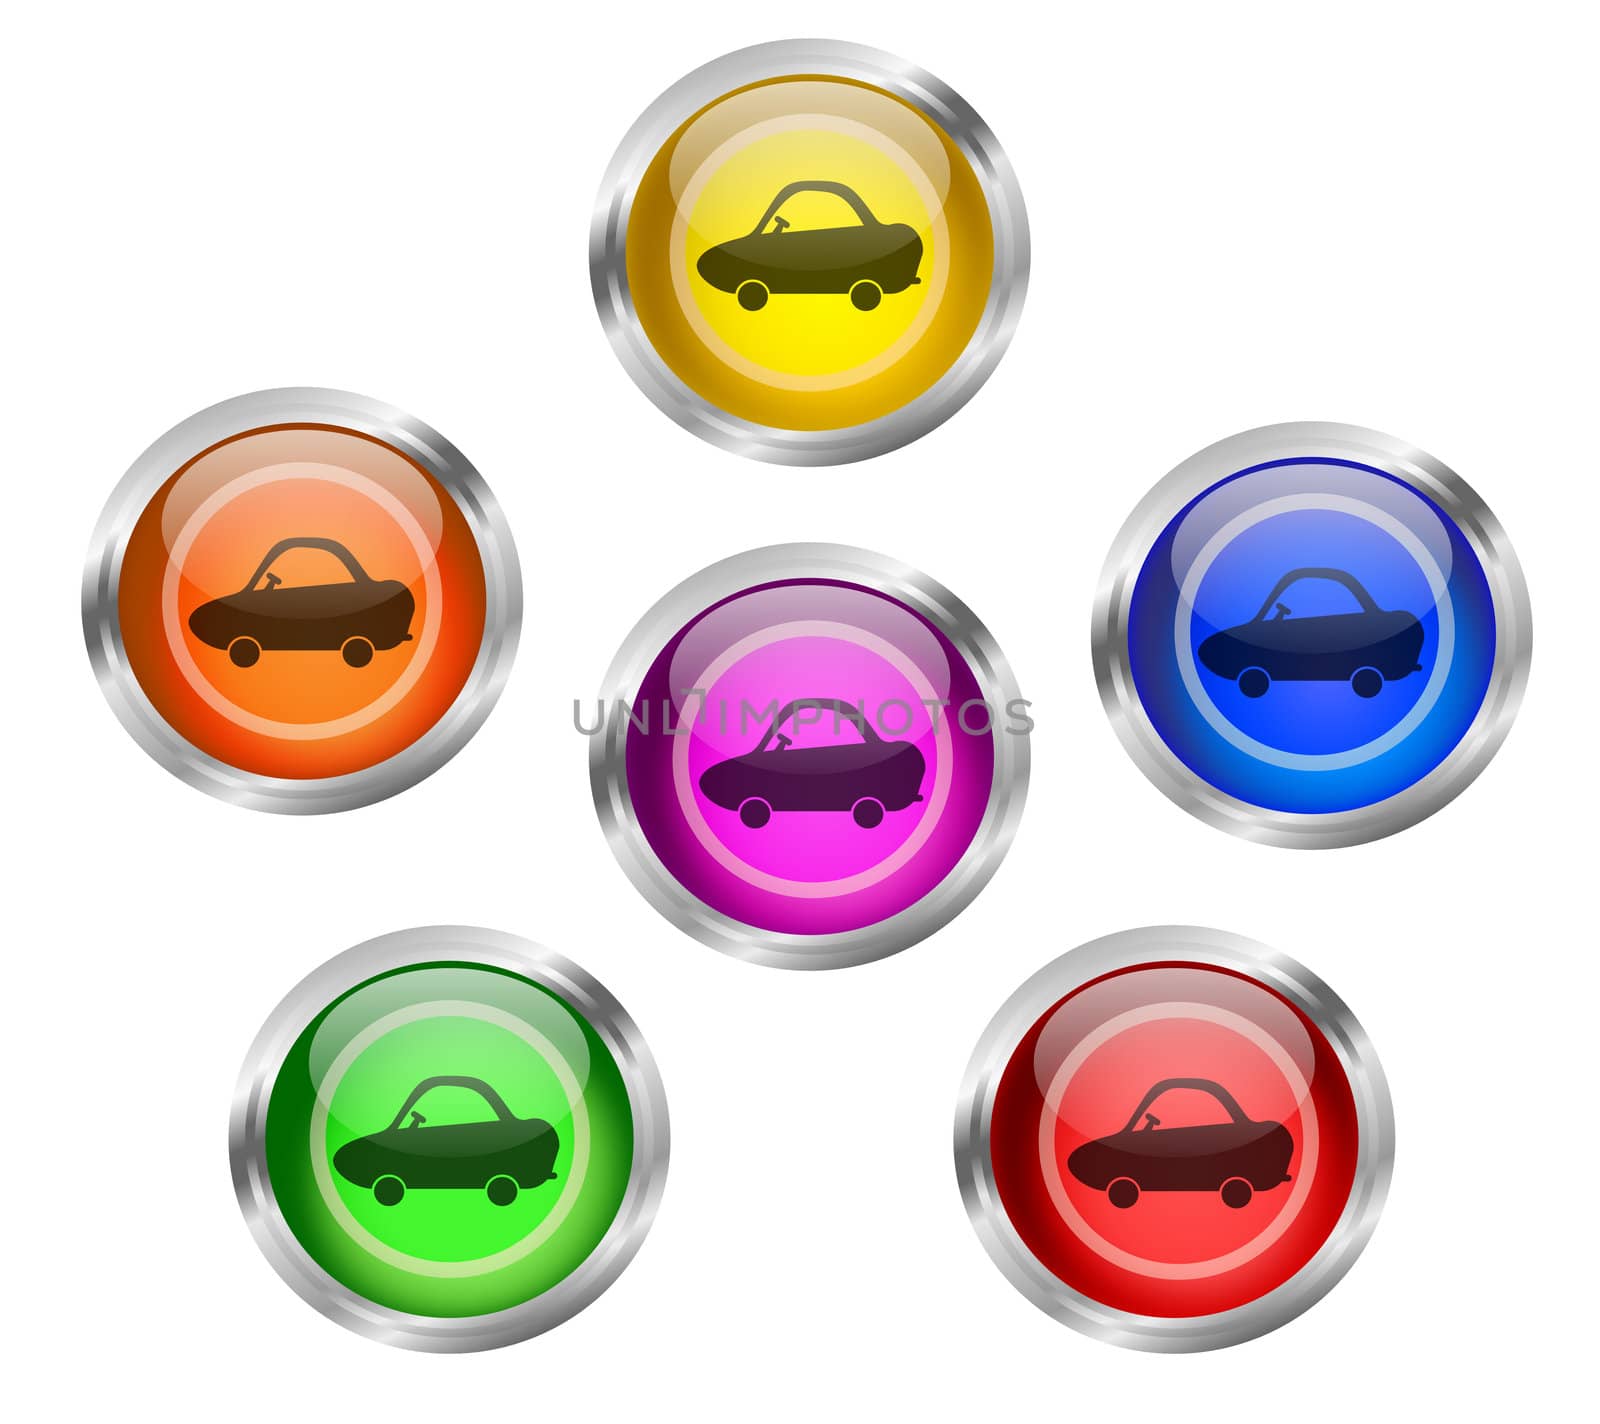 A set of glowing round car icon buttons in different colors with silver frame